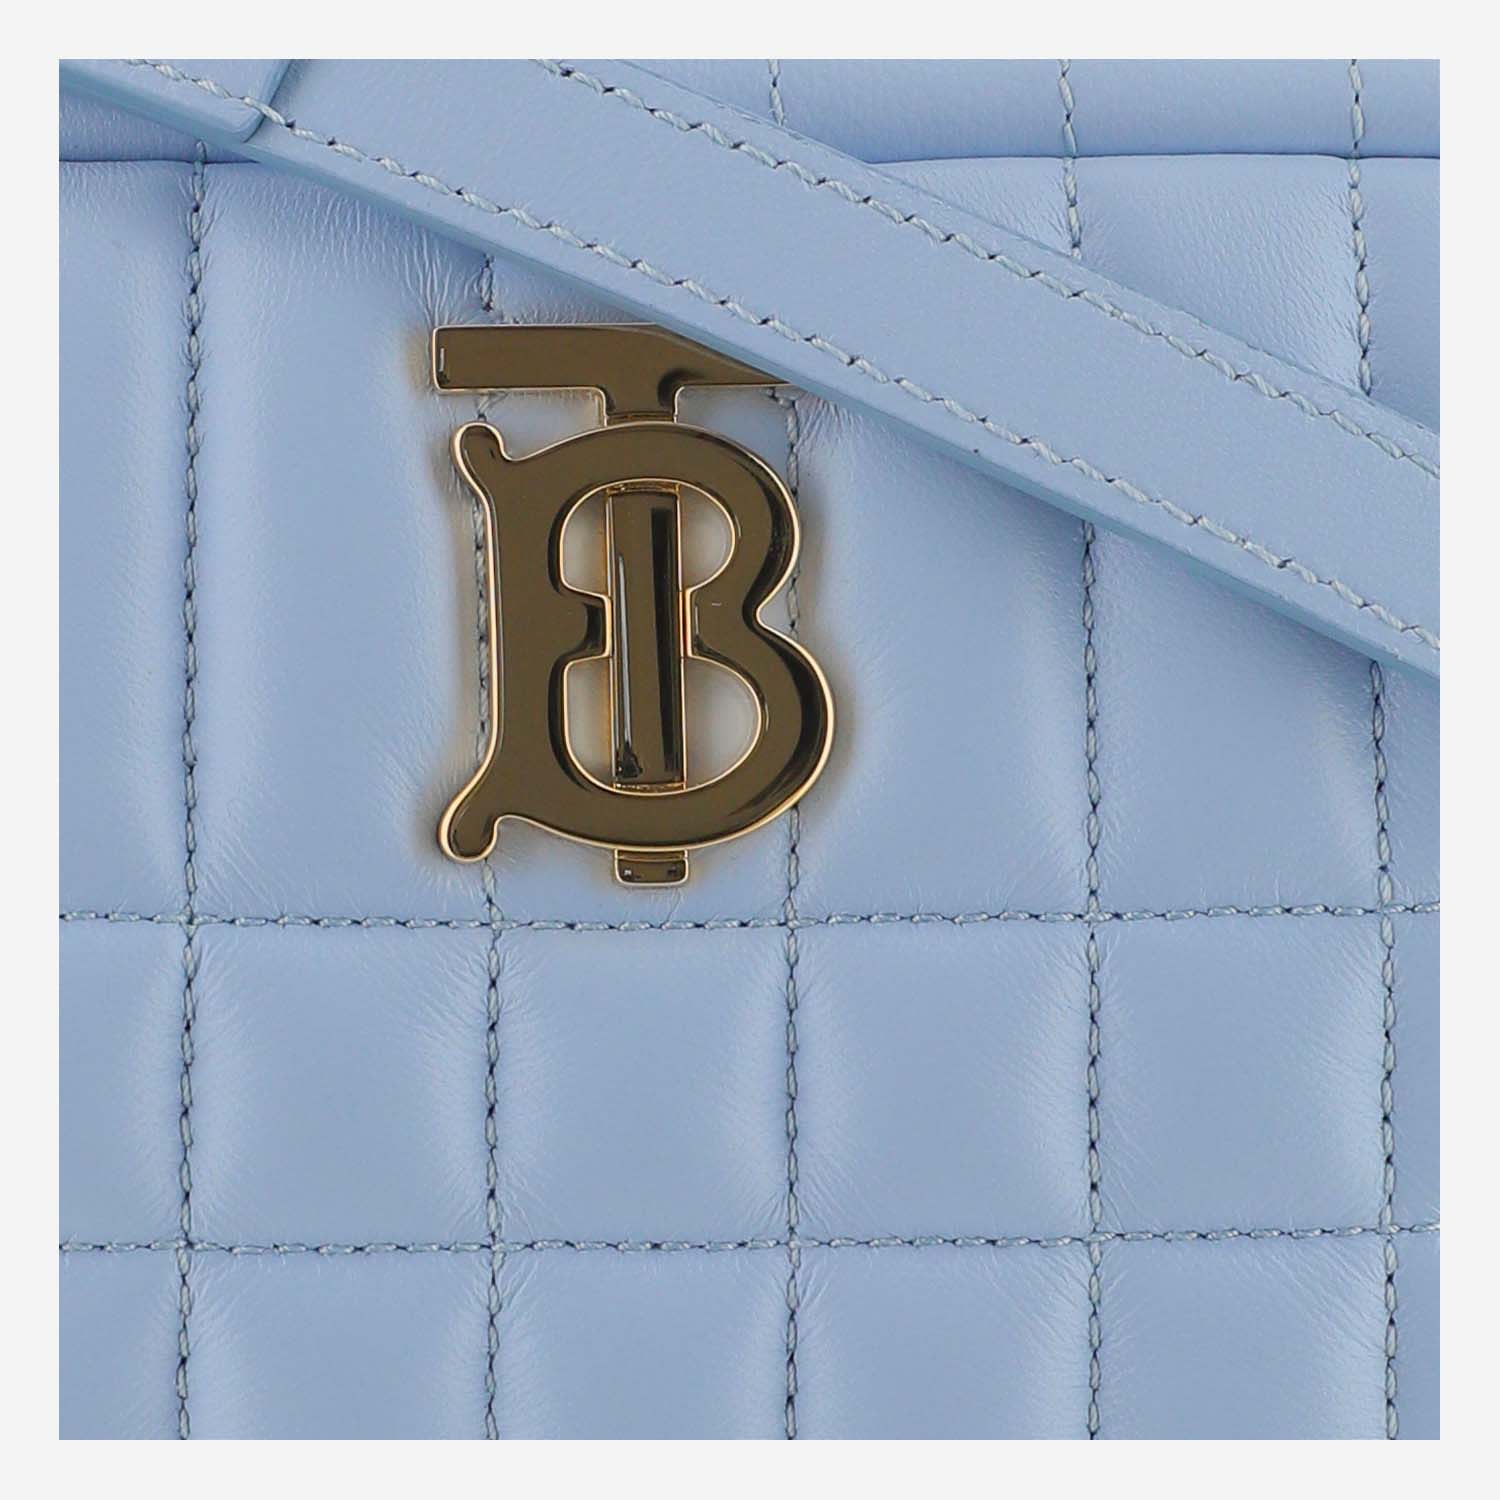 Shop Burberry Lola Mini Quilted Leather Camera Bag In Light Blue